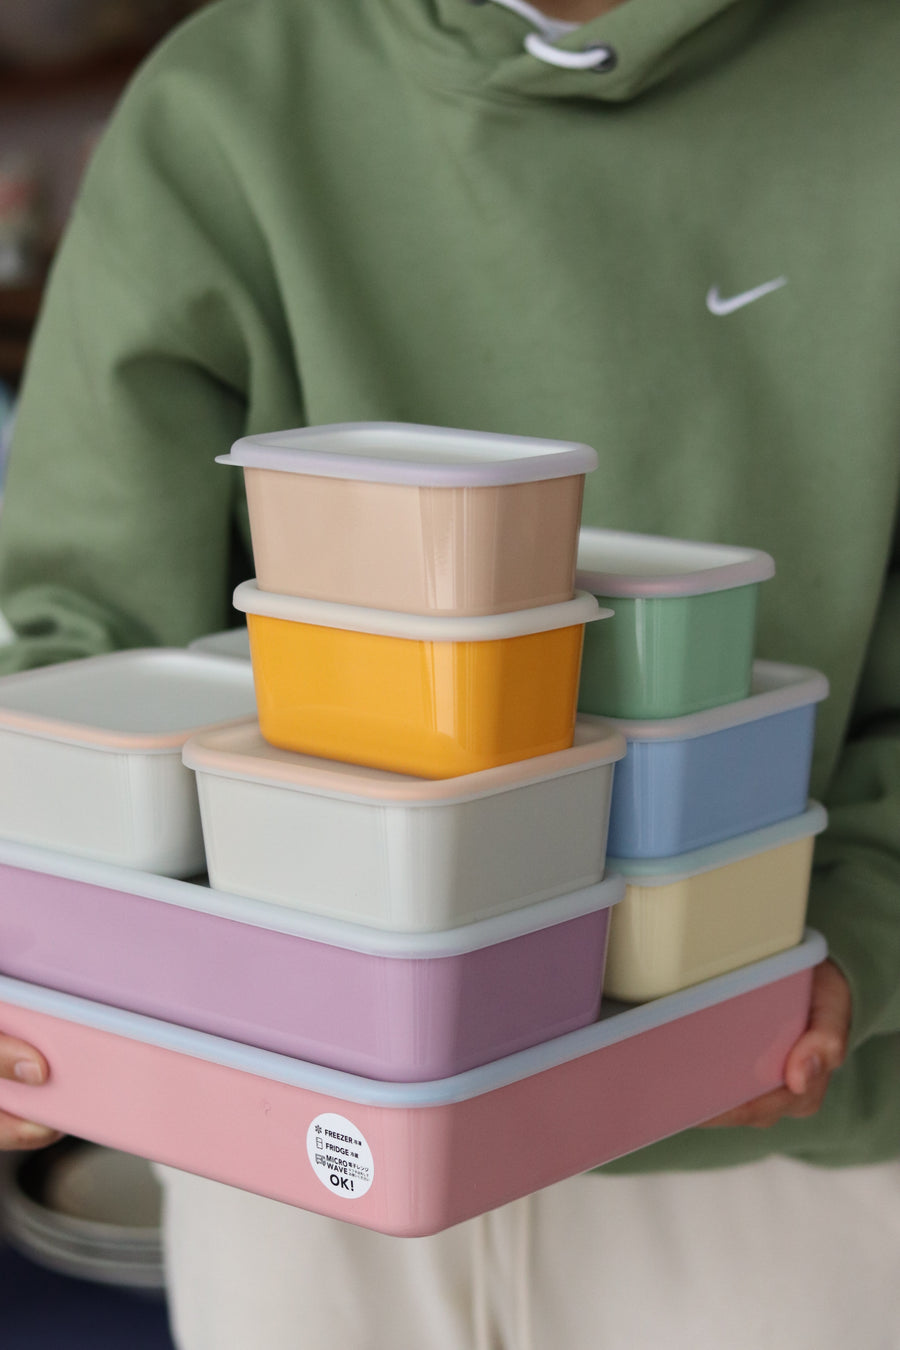 Freezer Food Containers with Lid